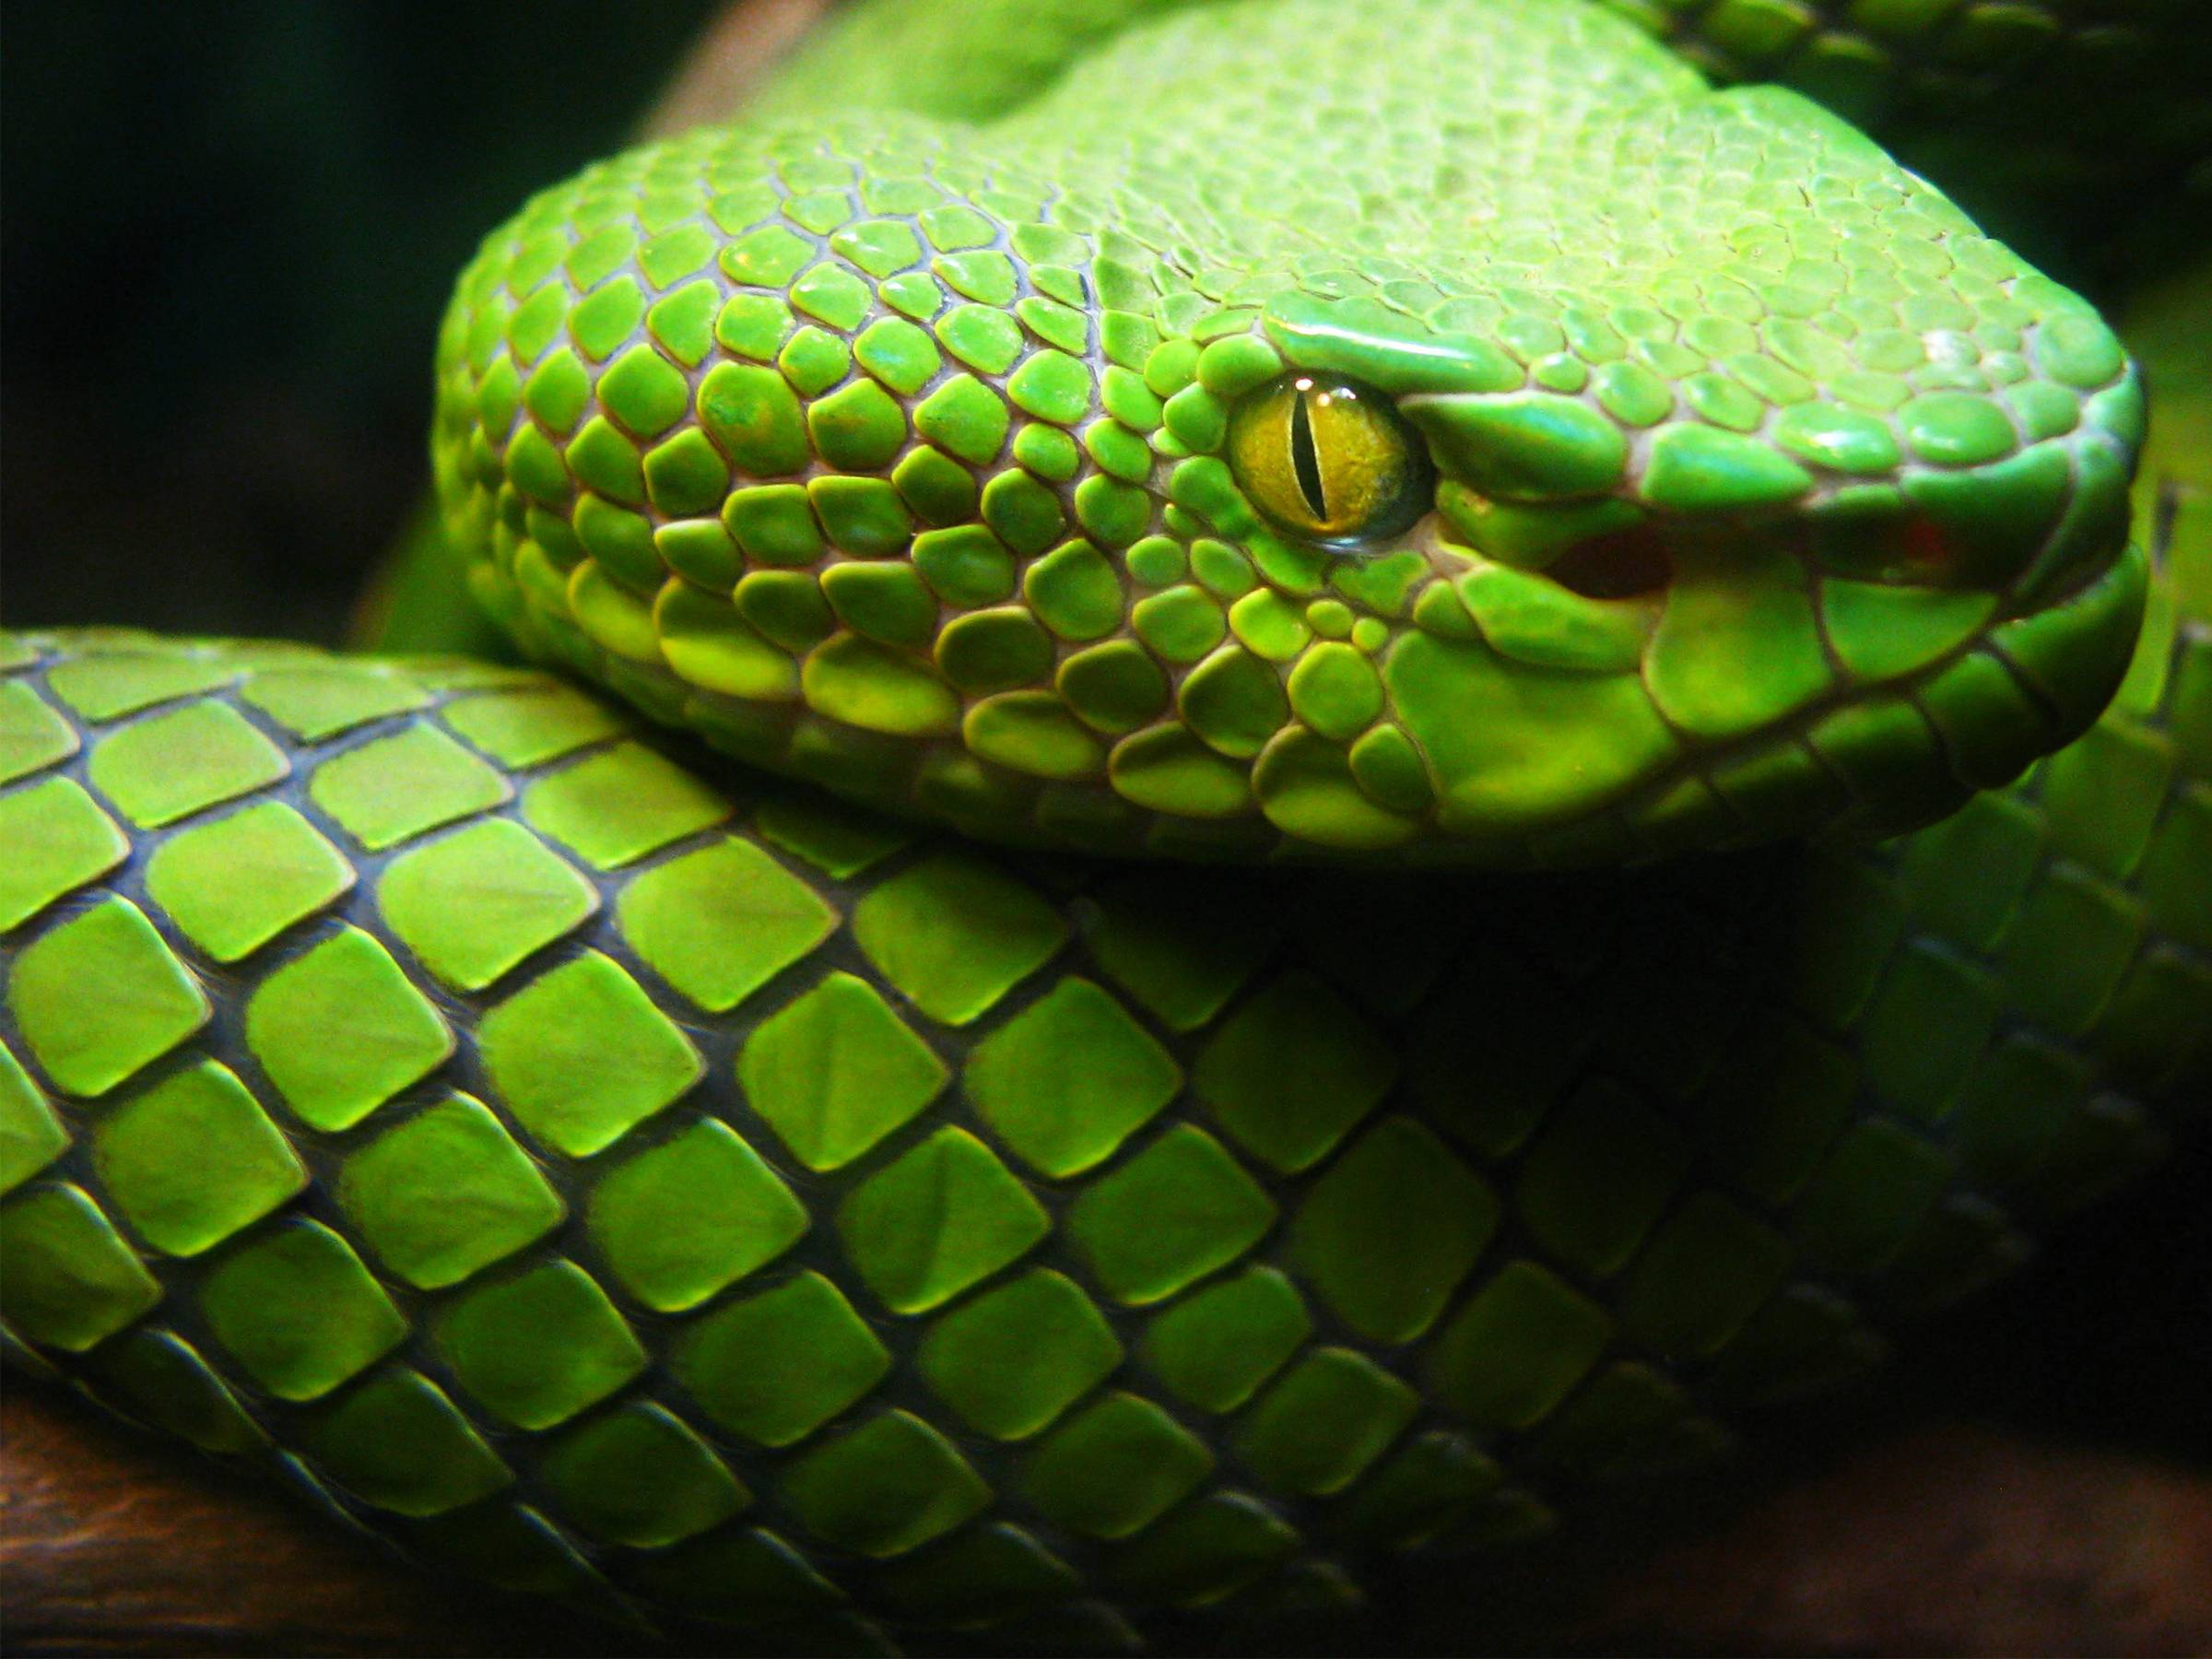 Answering Why Snakes Are Long Could Help Repair Human Spinal Cords ...